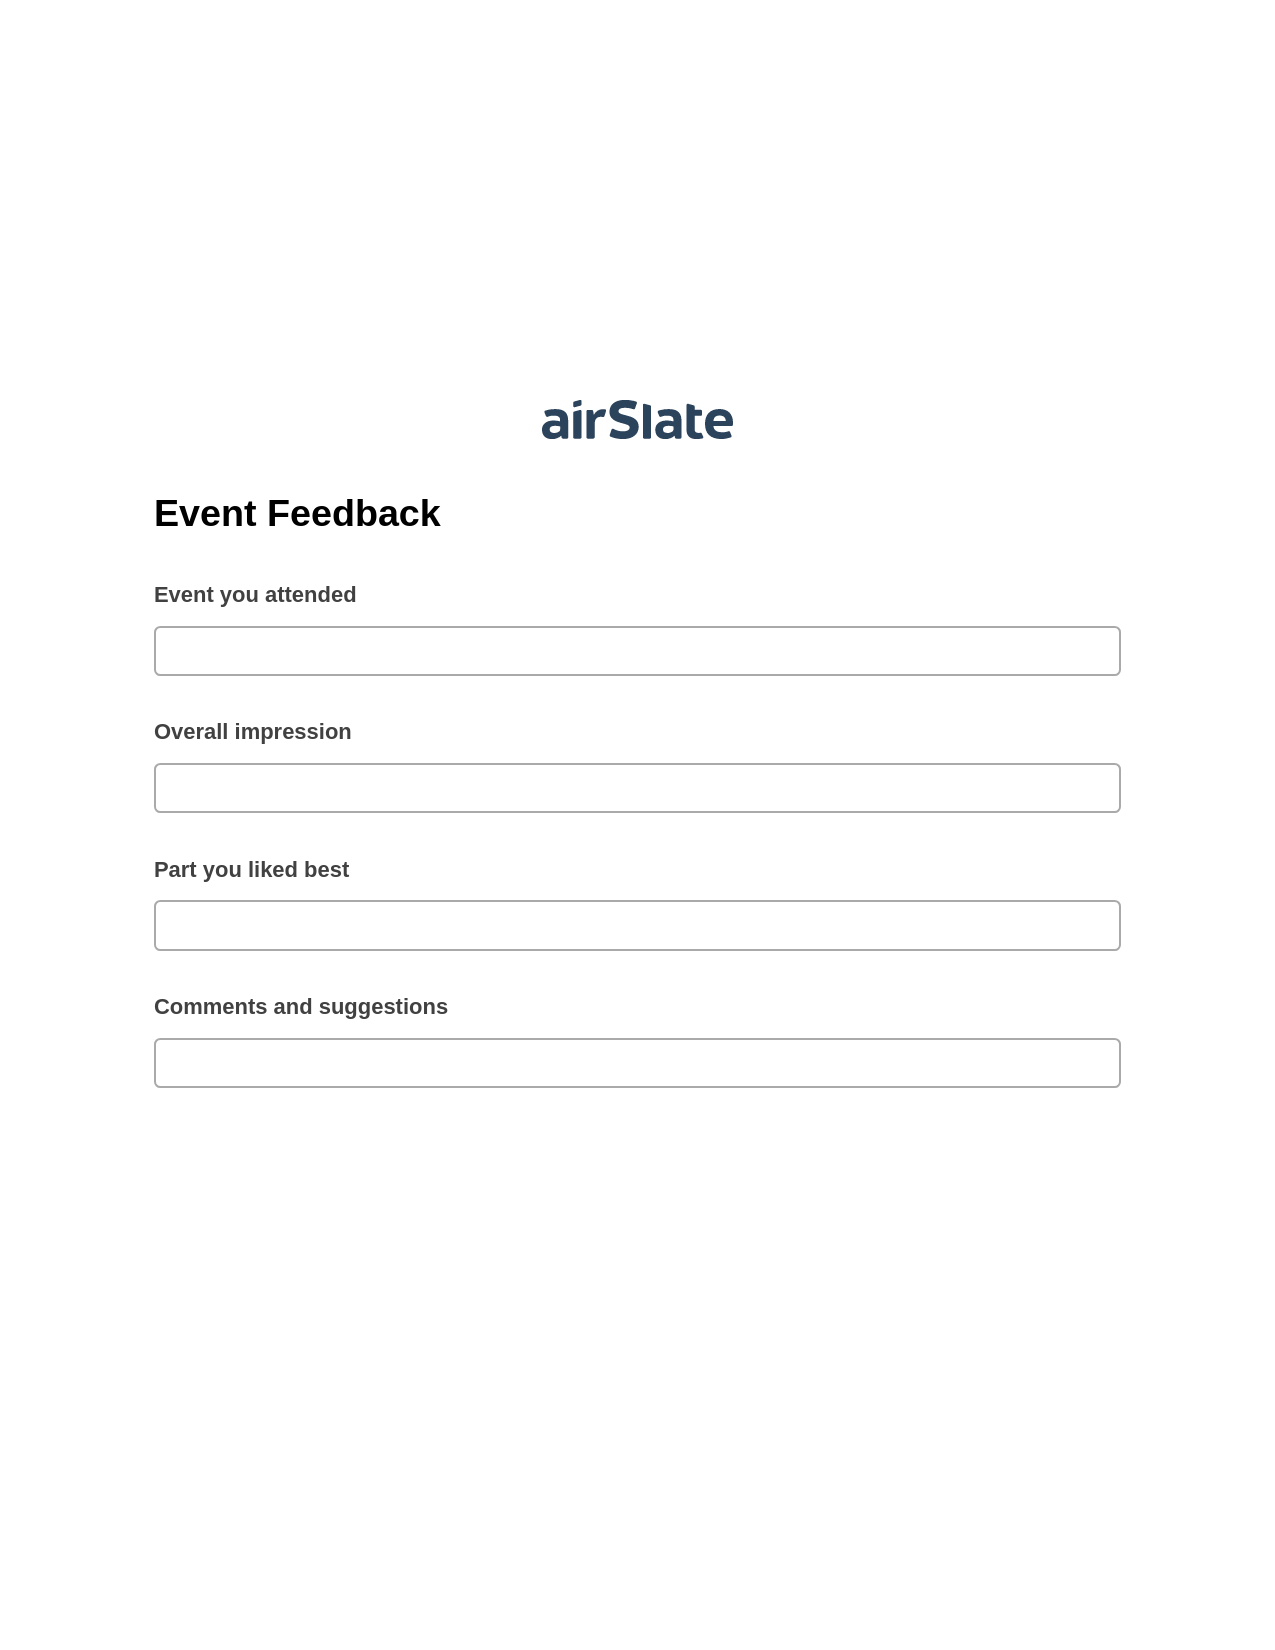 Event Feedback Pre-fill from MySQL Bot, SendGrid send Campaign bot, Export to Excel 365 Bot